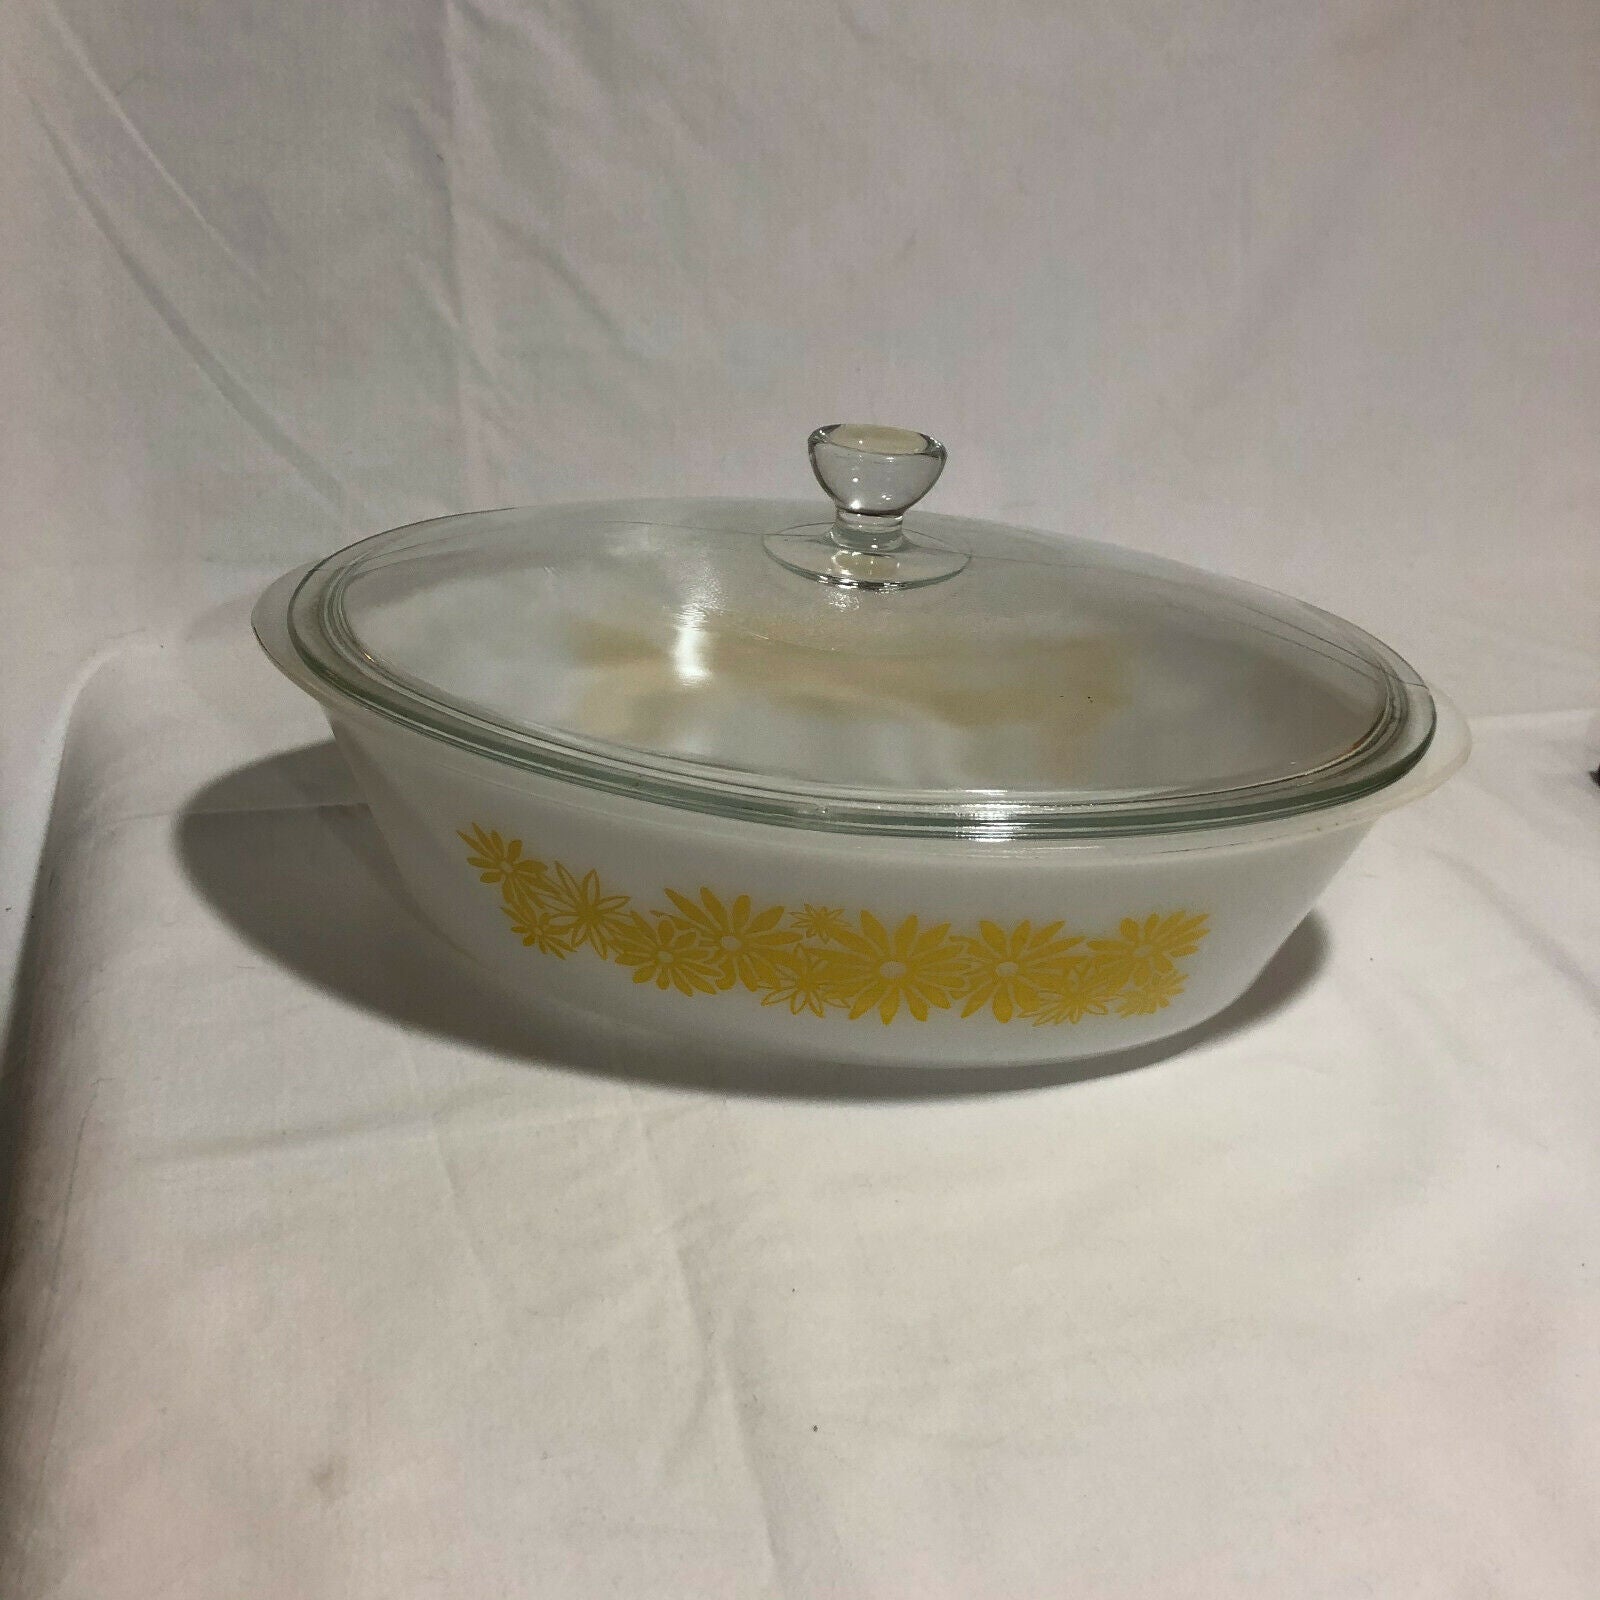 Vintage Amber Glass Casserole Dish With Yellow Flowers 